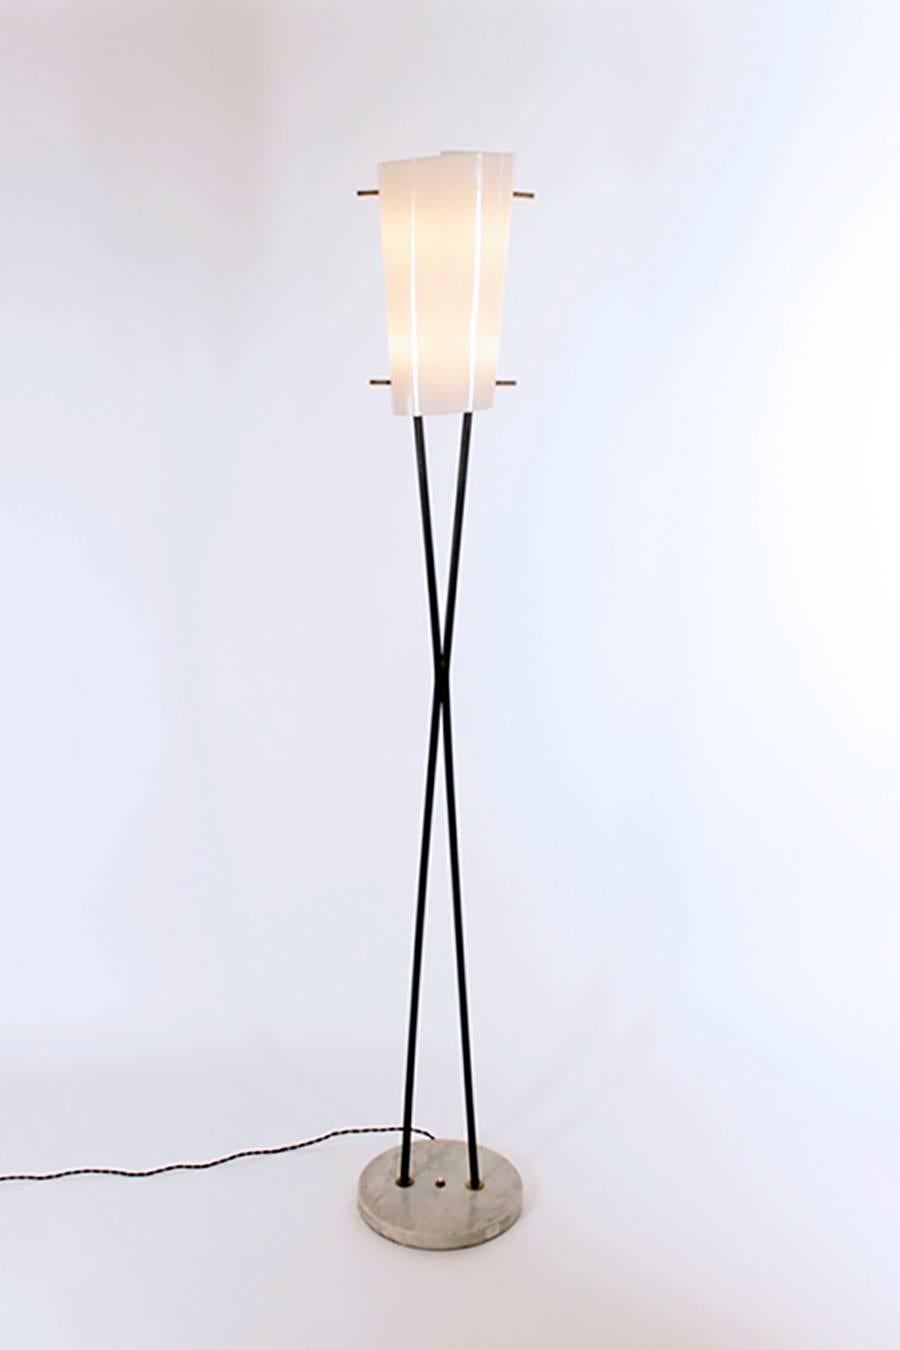 Rare floor lamp by Stilnovo, Italy, circa 1955.
Marble base, double stern in black lacquered metal. Lampshade in a sheet of thermoformed white Perspex, brass fixtures.